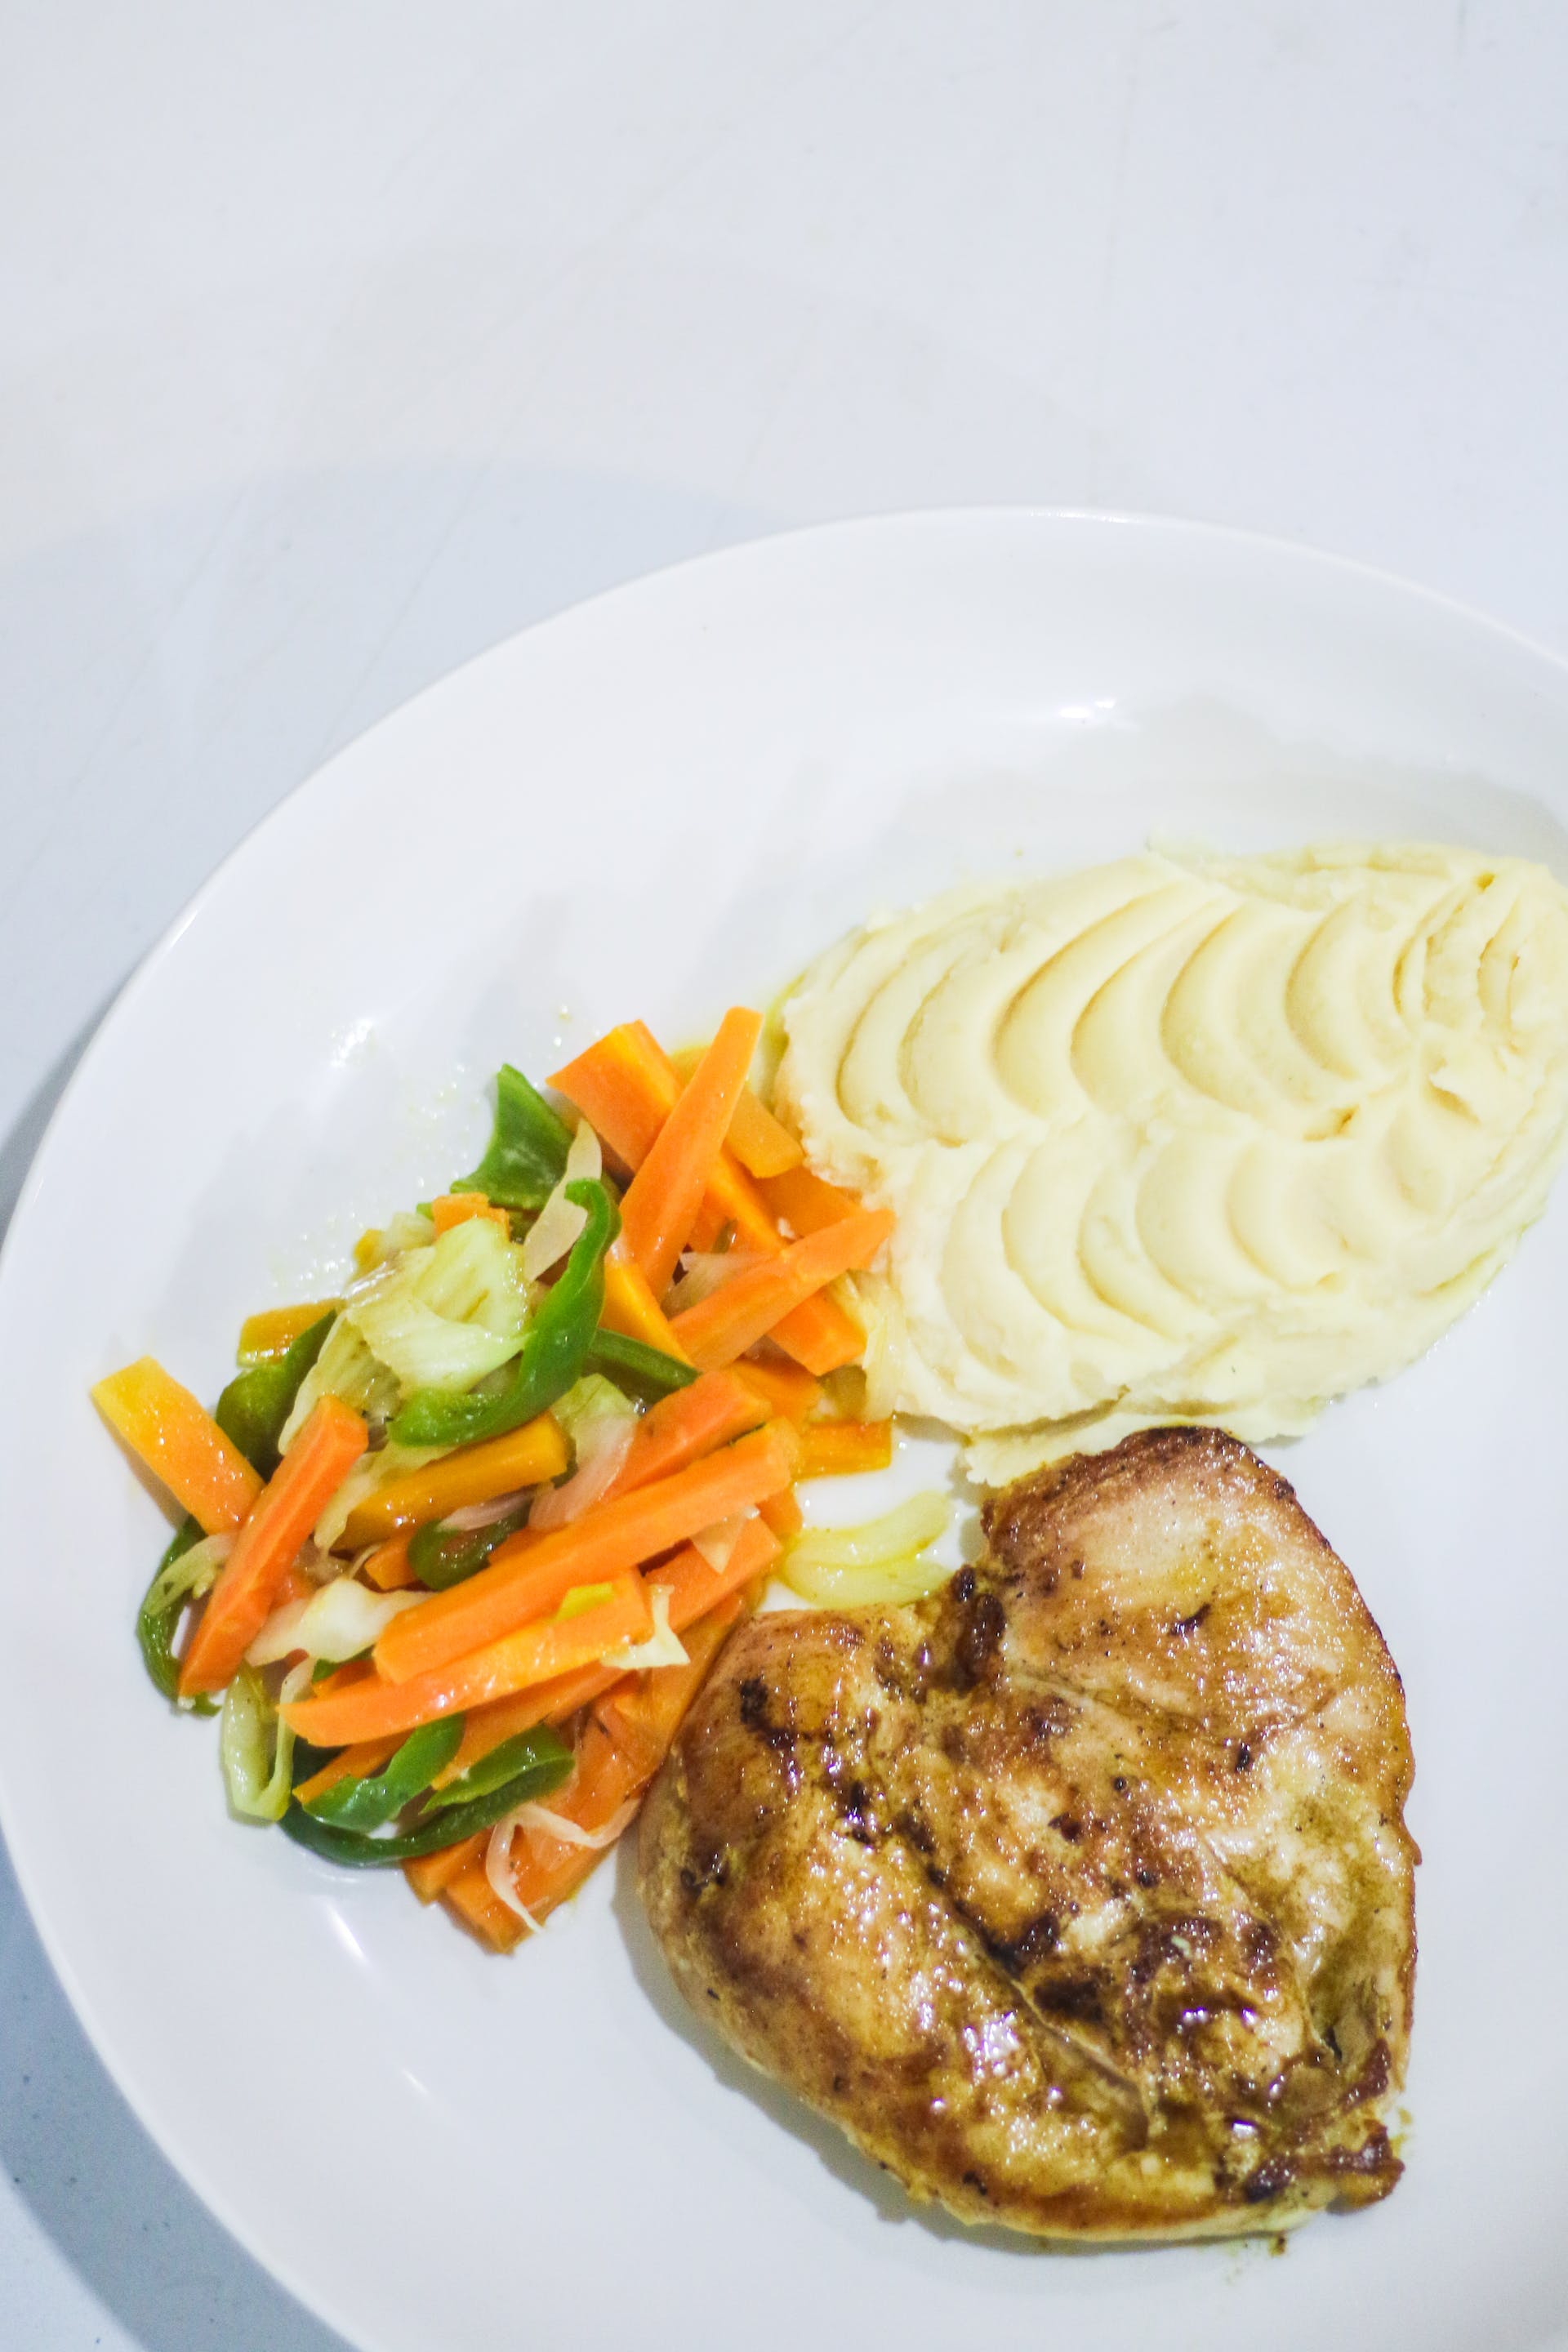 A plate of chicken breast, vegetables, and mashed potatoes | Source: Pexels